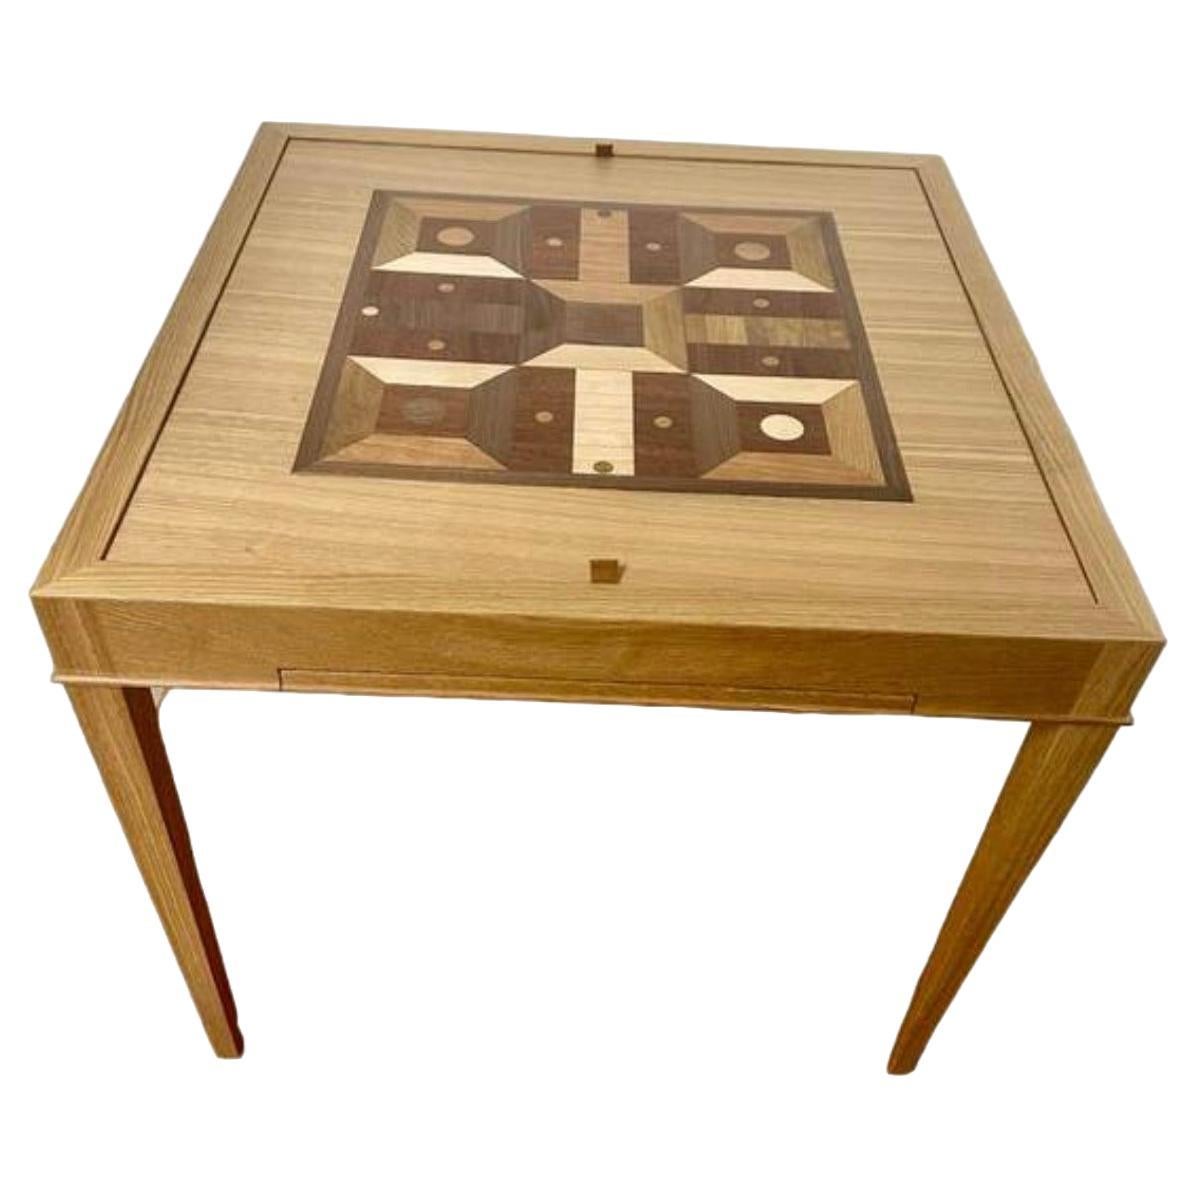 Custom walnut or mahogany table with removable top that exposes the backgammon board. The top can be flipped over to expose the chess board. Perfect size to play cards, poker, board games etc. The marquetry is integrated into the top. Can be made in